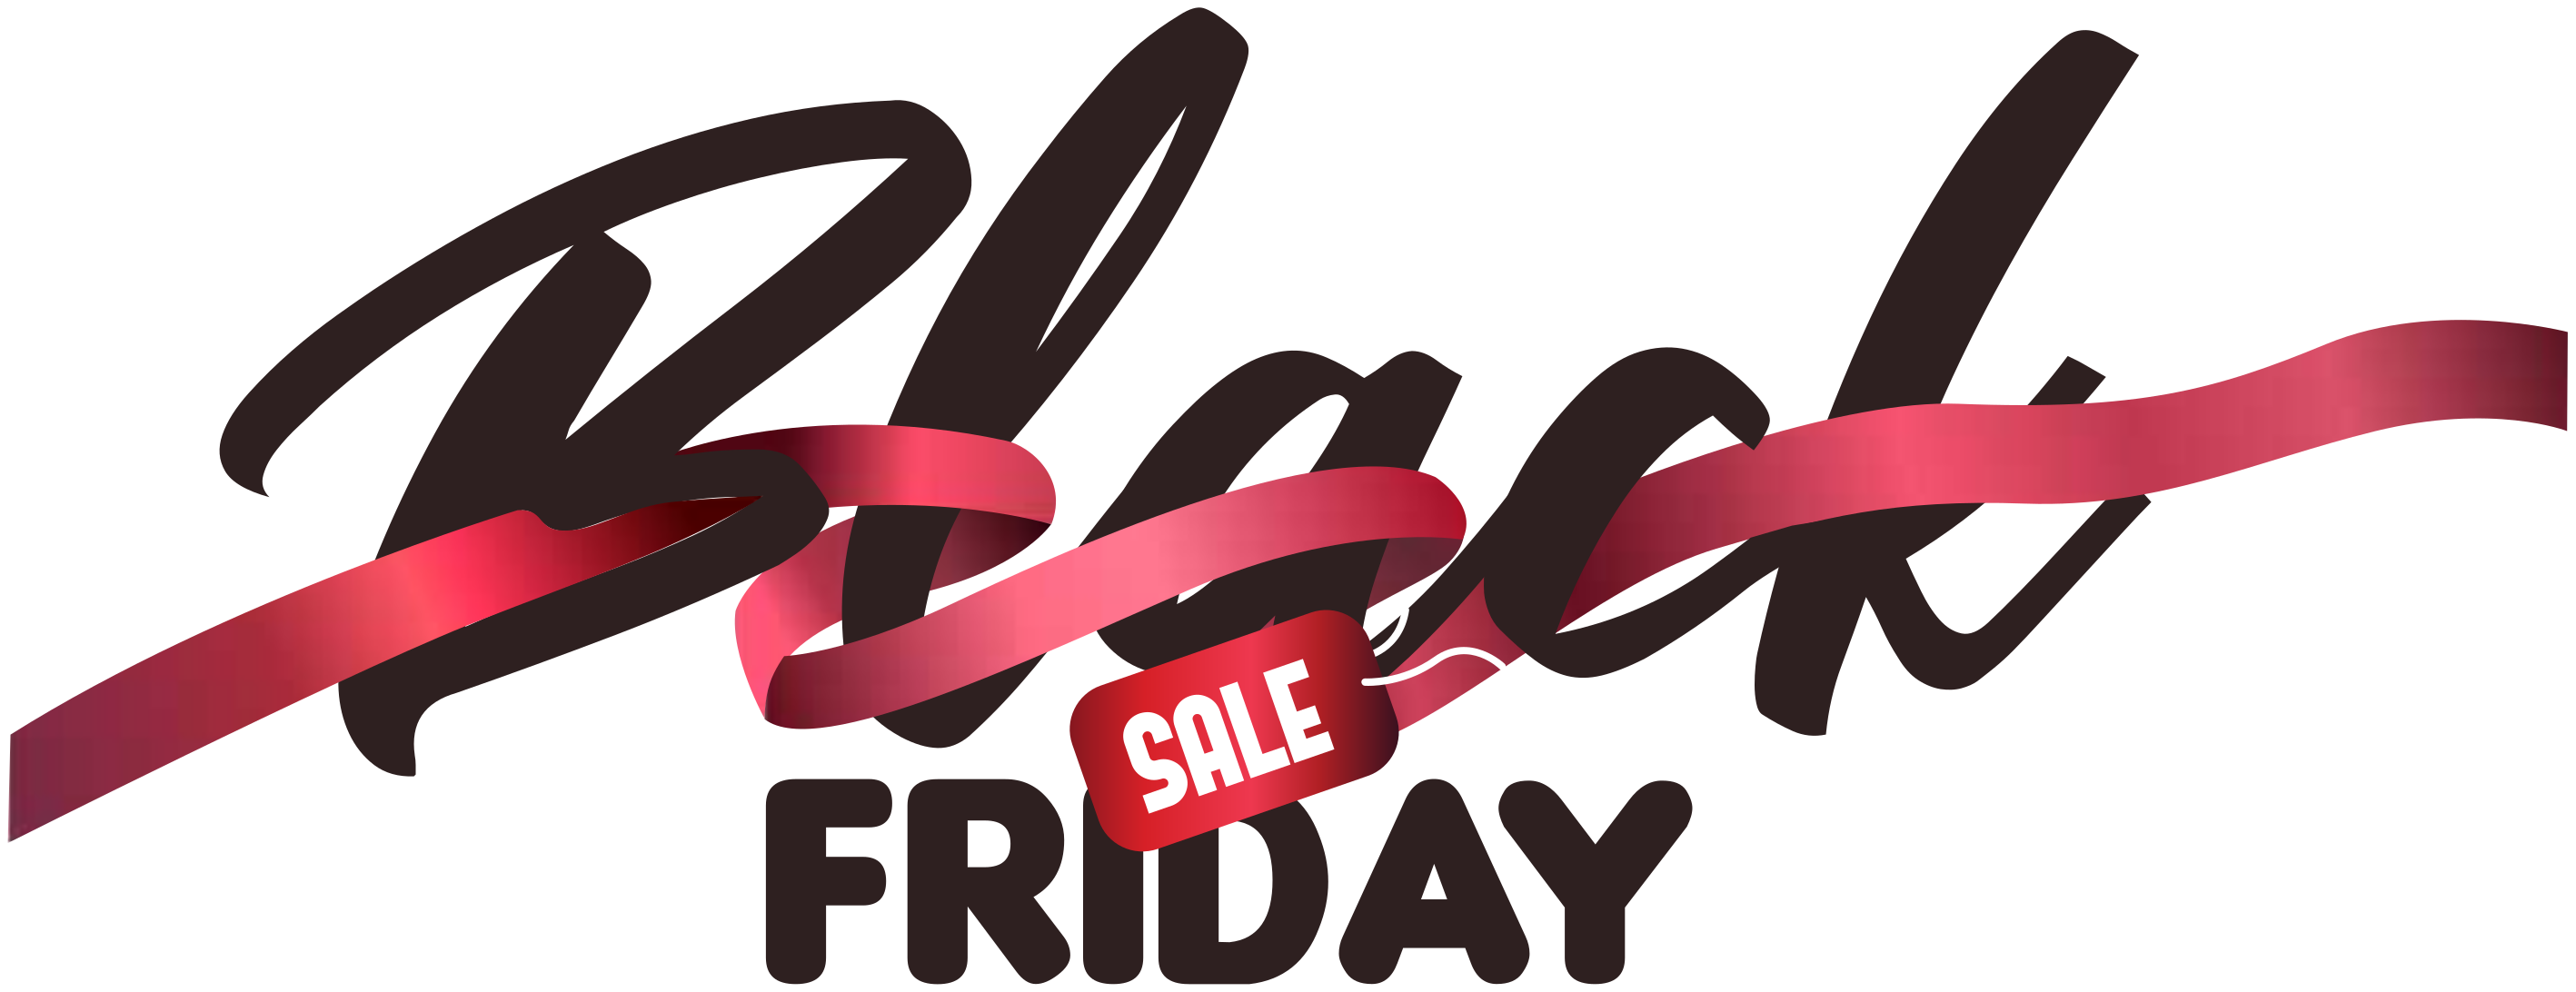 Text Friday Black Free Clipart HQ PNG Image